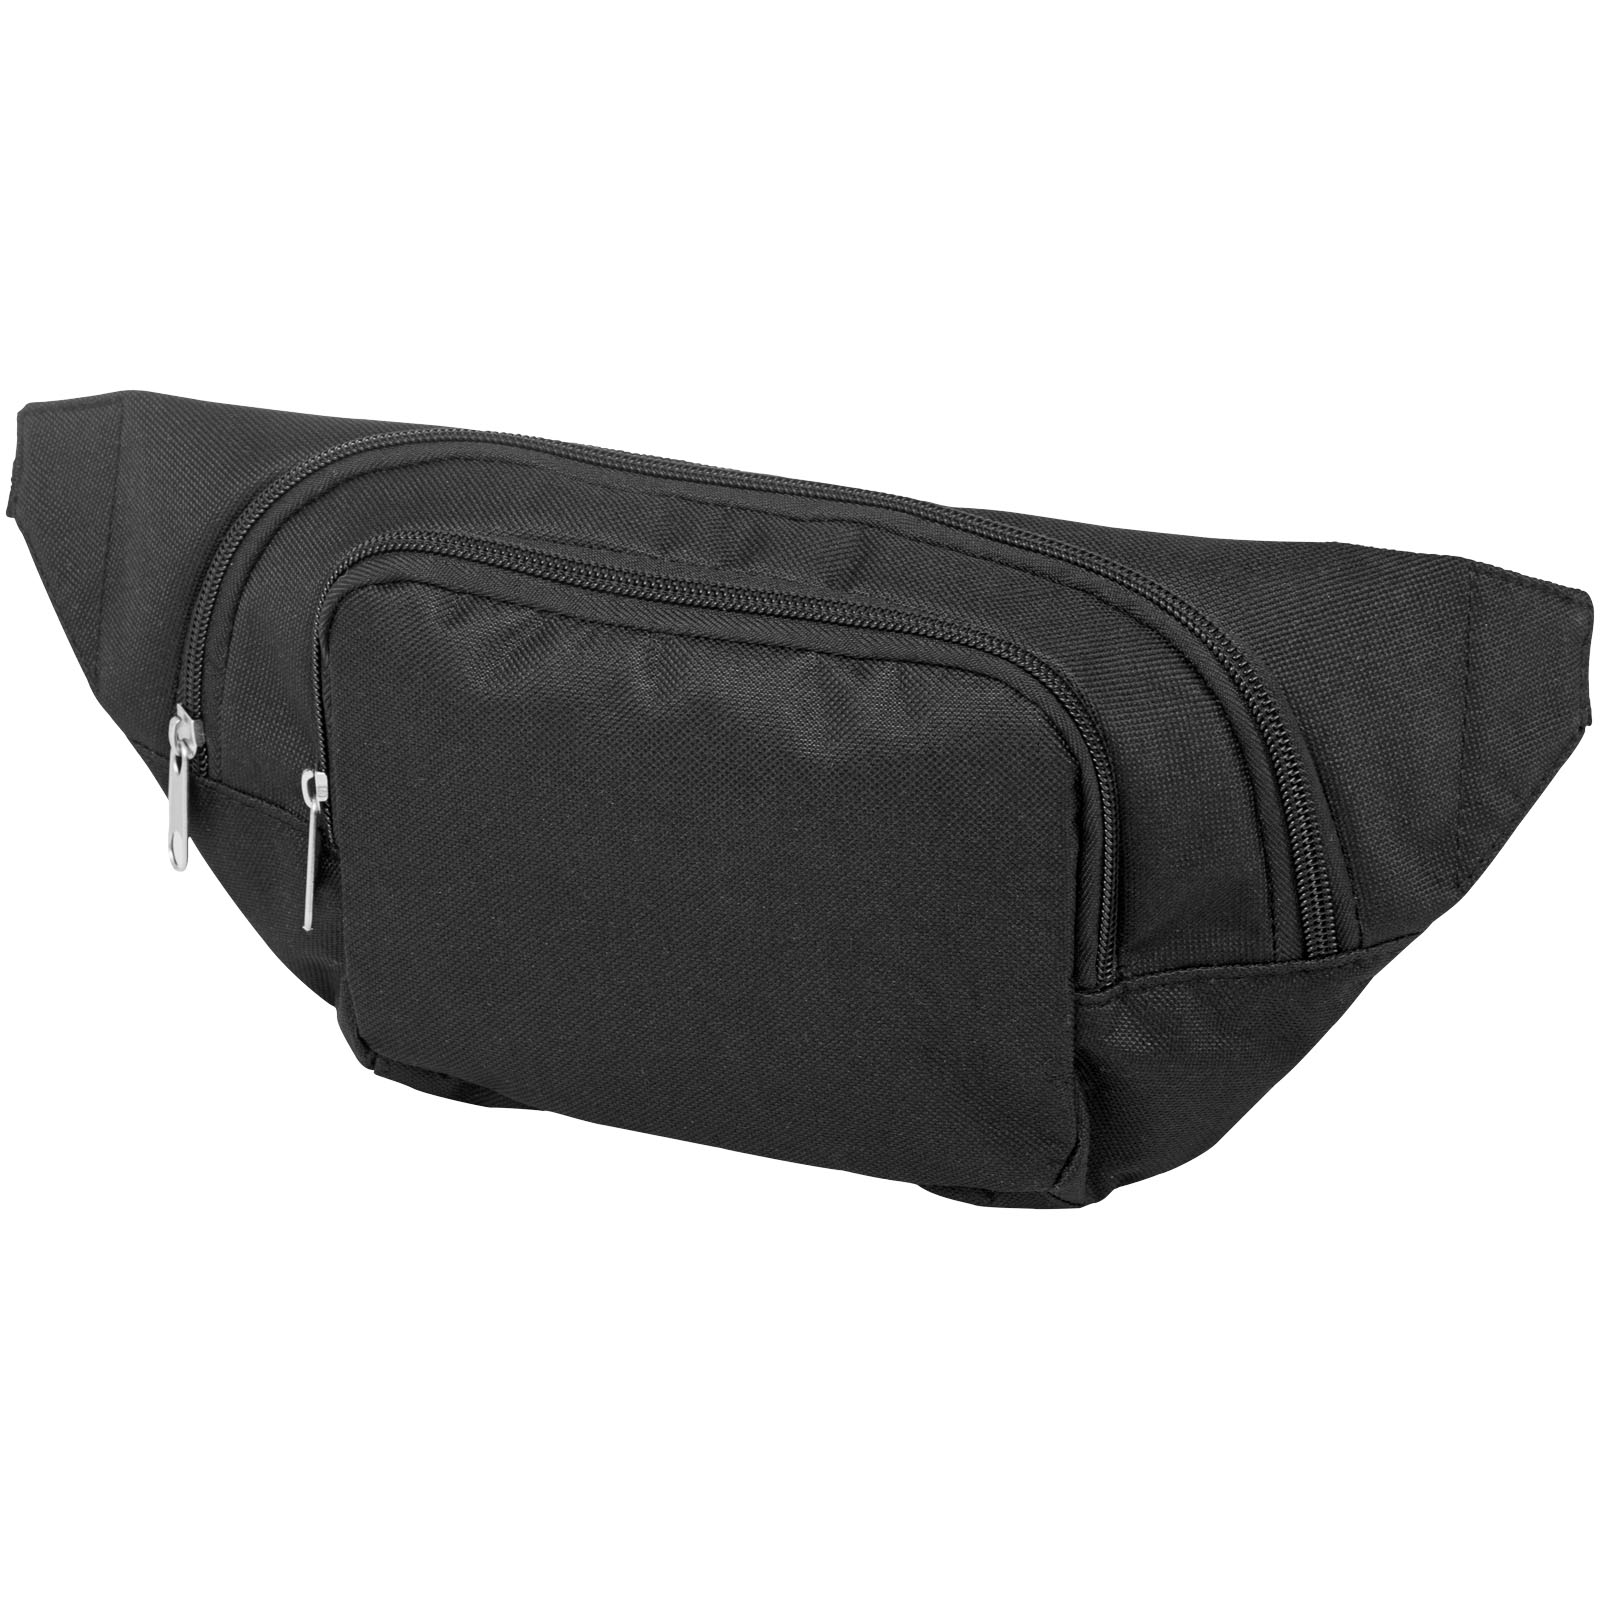 Advertising Travel Accessories - Santander fanny pack with two compartments